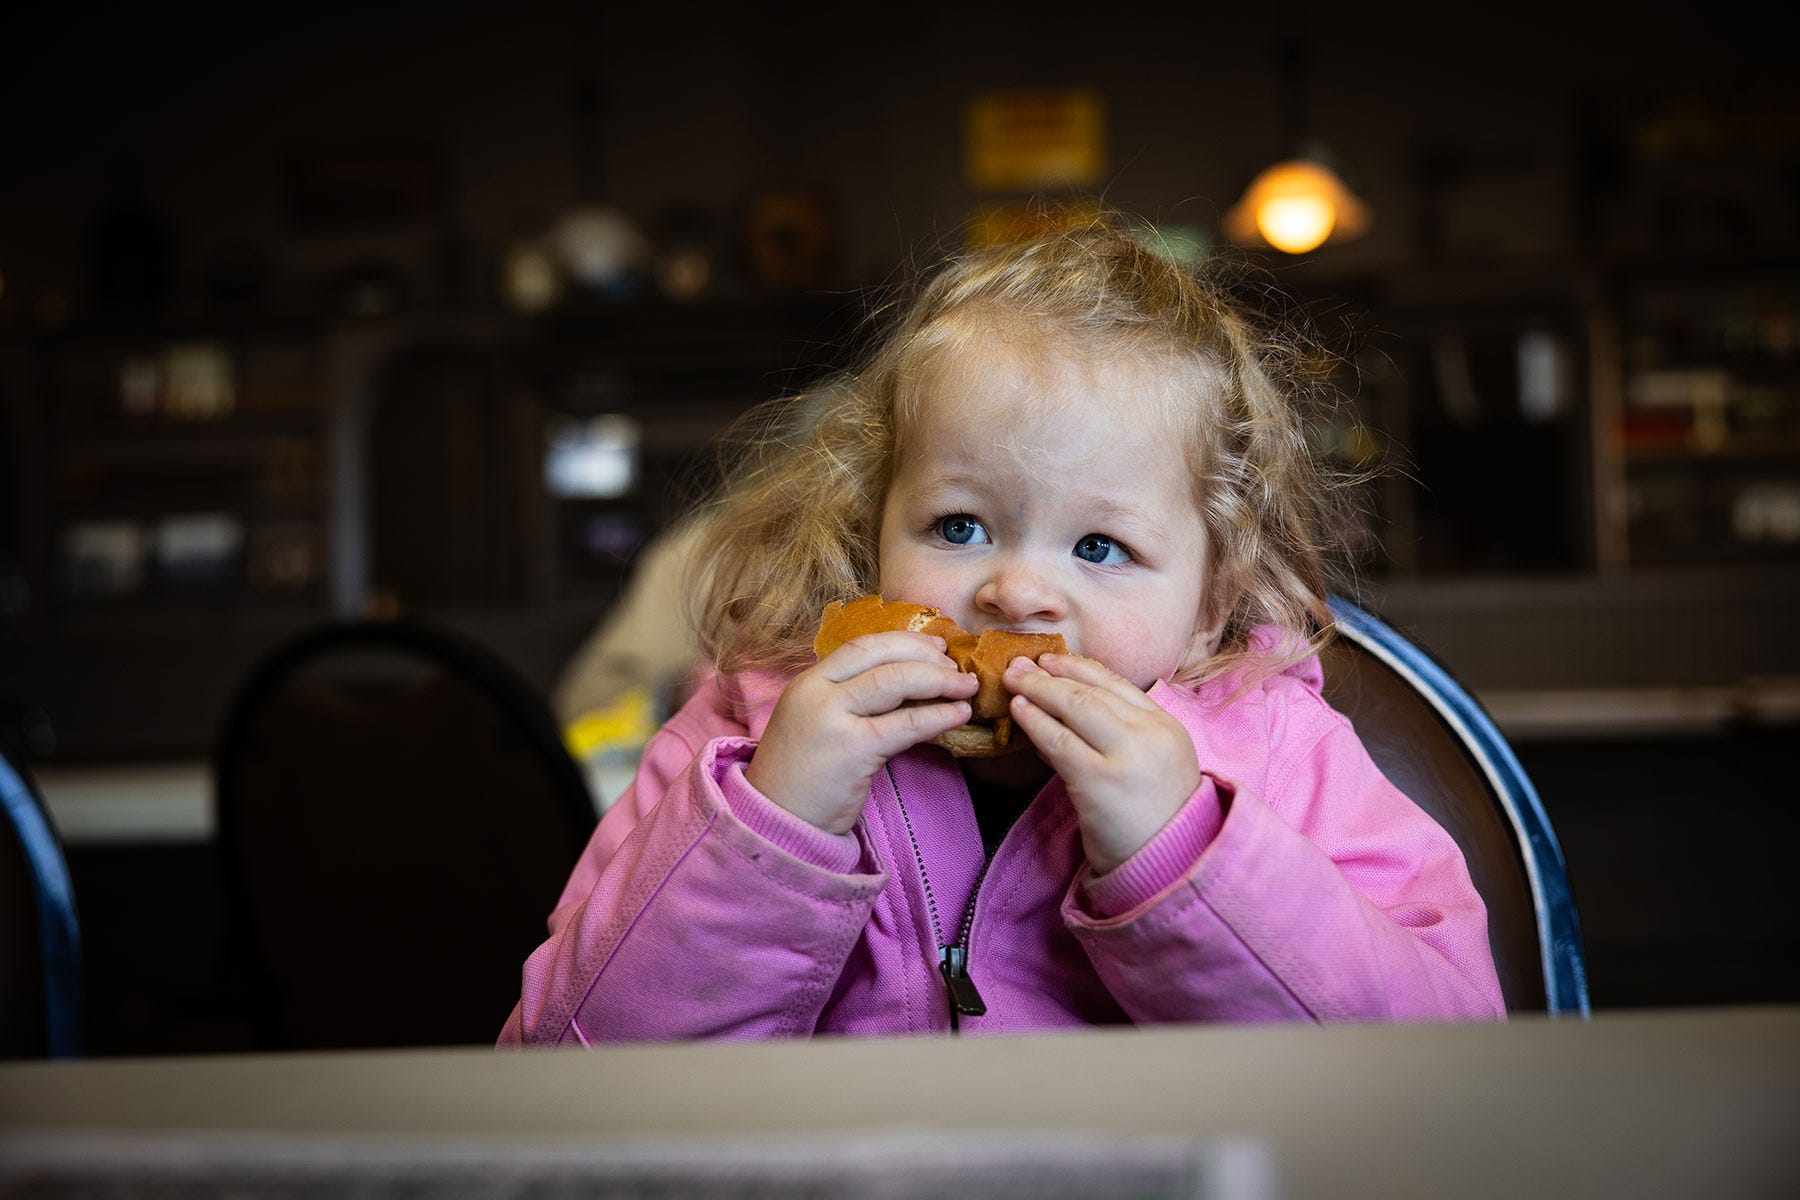 A young girl wearing a pink coat and eating a cheeseburger